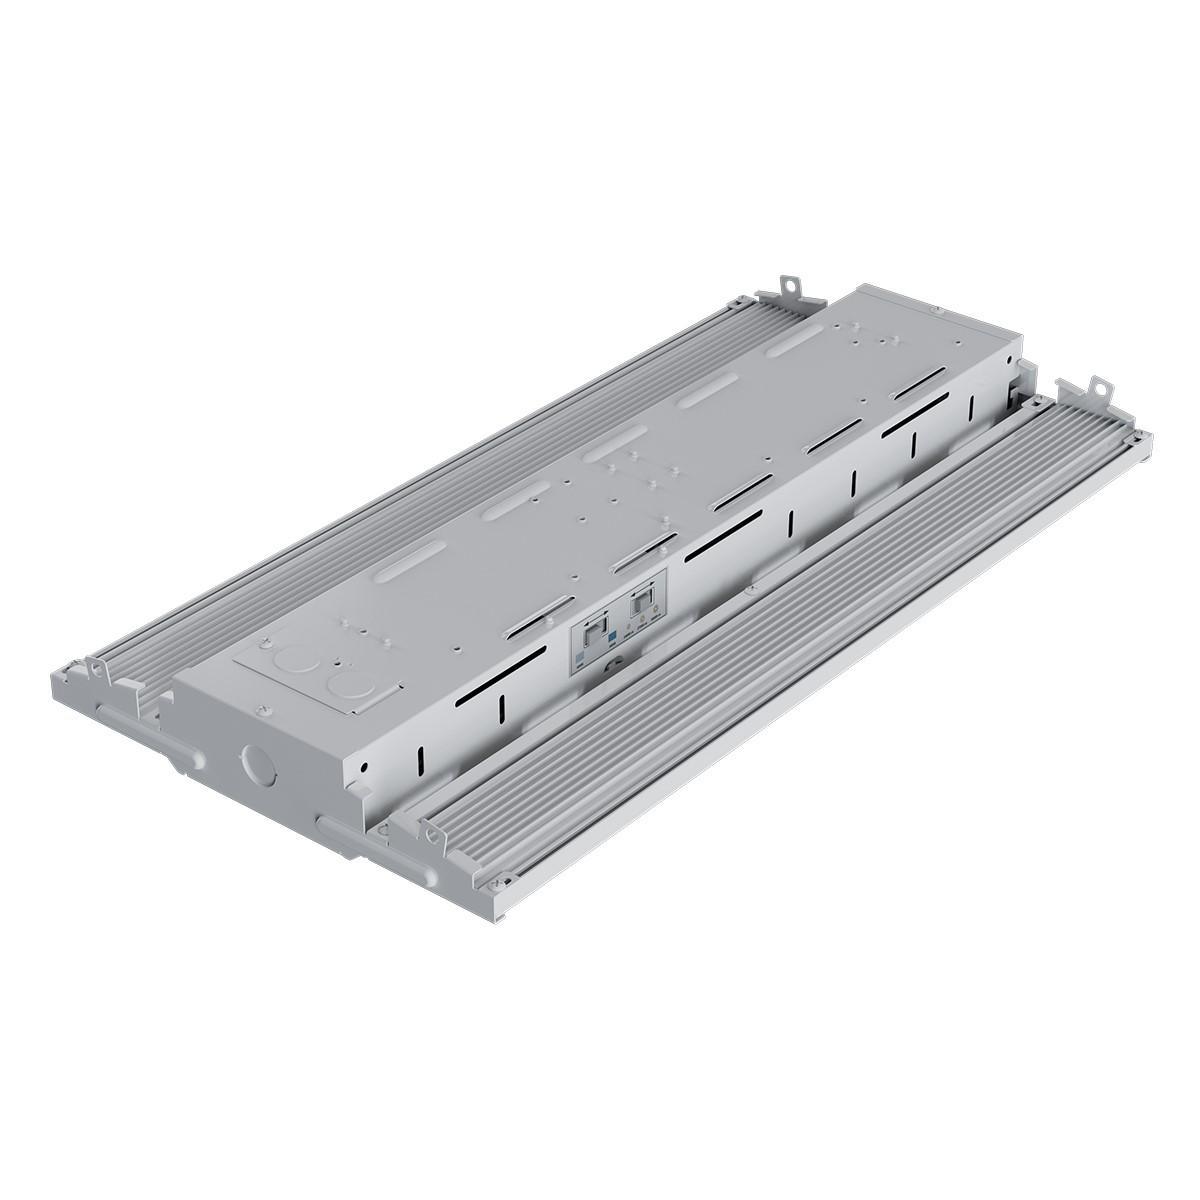 Compact Pro LED High Bay, Switchable Lumens 24000/30000 and CCT 4000K/5000K, 120/277V